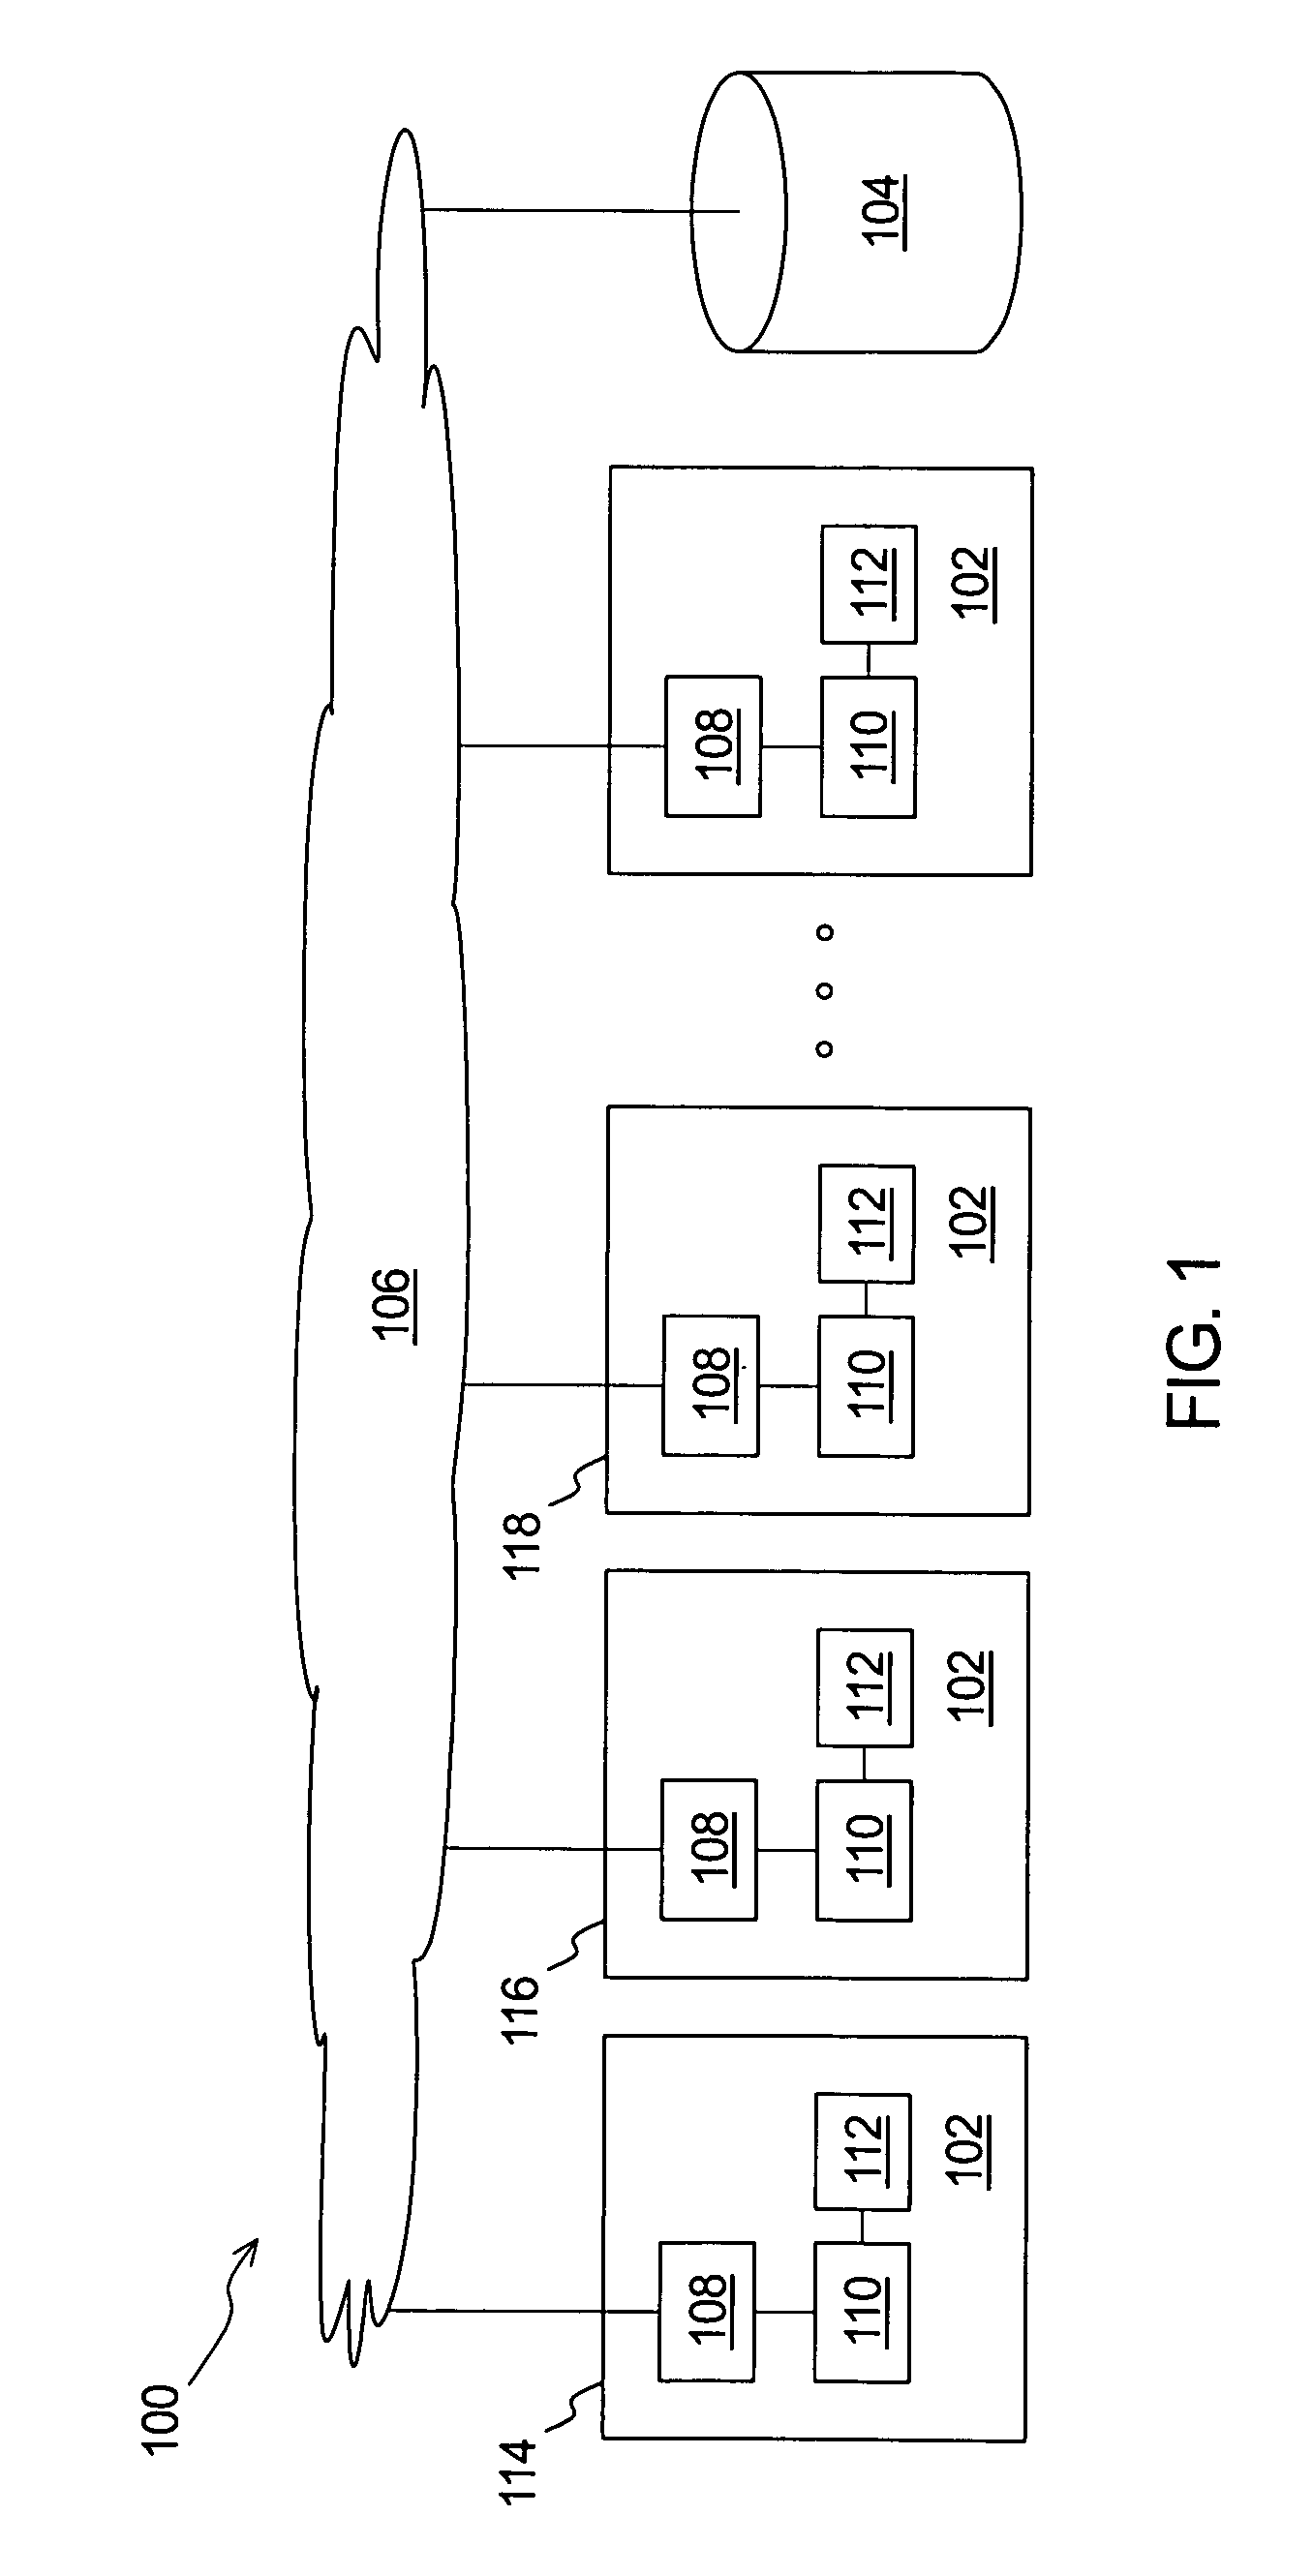 Method of operating distributed storage system